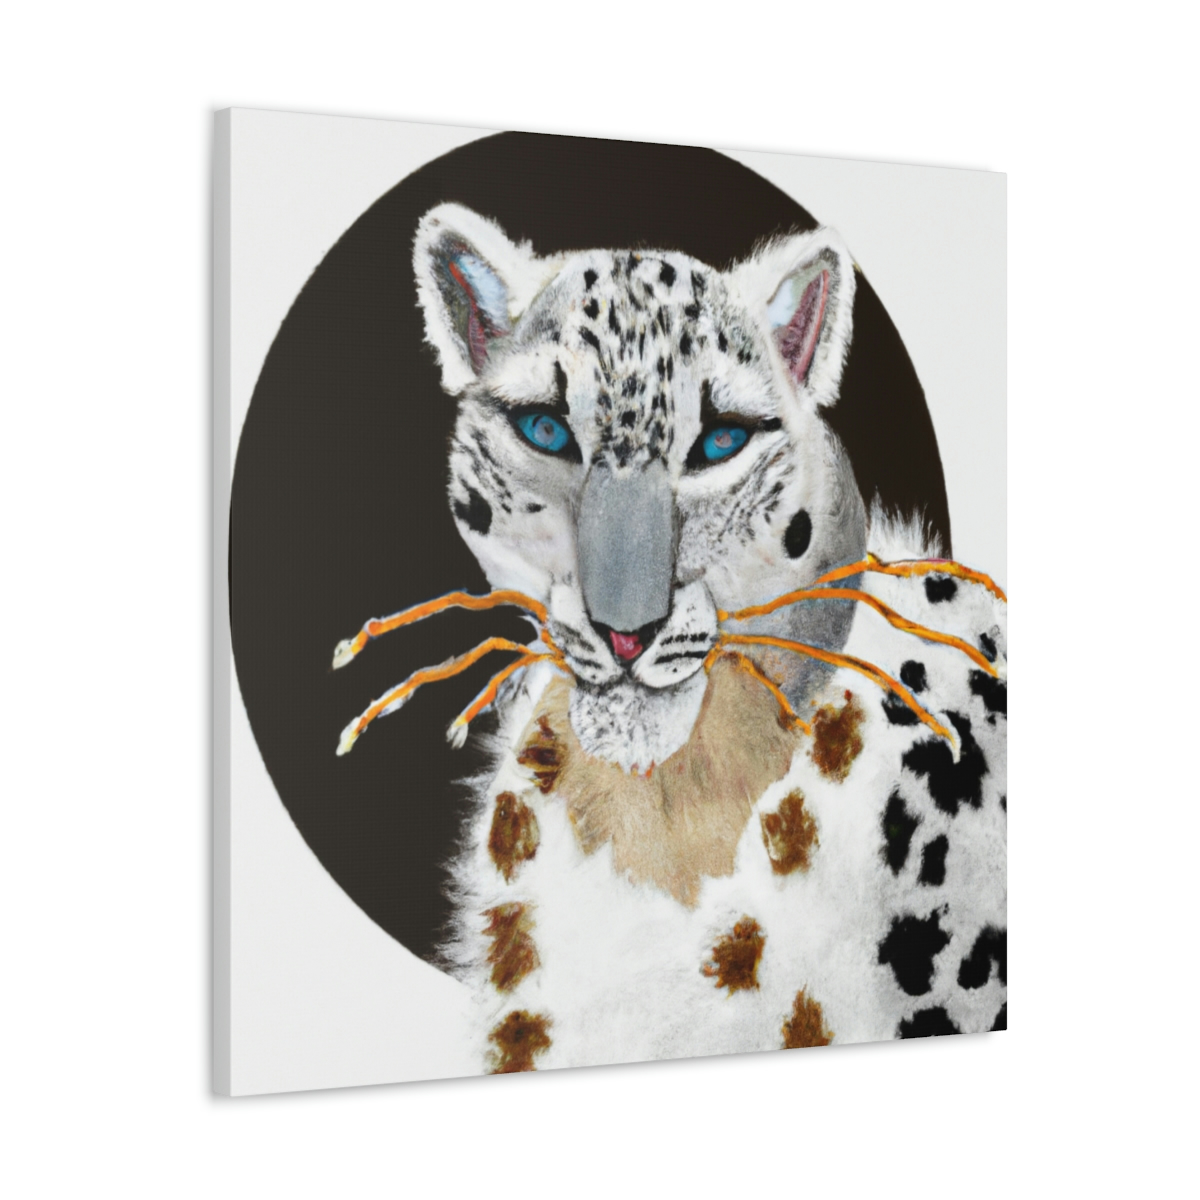 Check out our new piece.  Thoughts? 🖌️🎨#ArtPiece #SnowLeopard #ArtDeco #Canvas #ContemporaryArt #WallDecor #AsianInspired #UniqueArt #WildArt #AbstractStyle #WallStyle